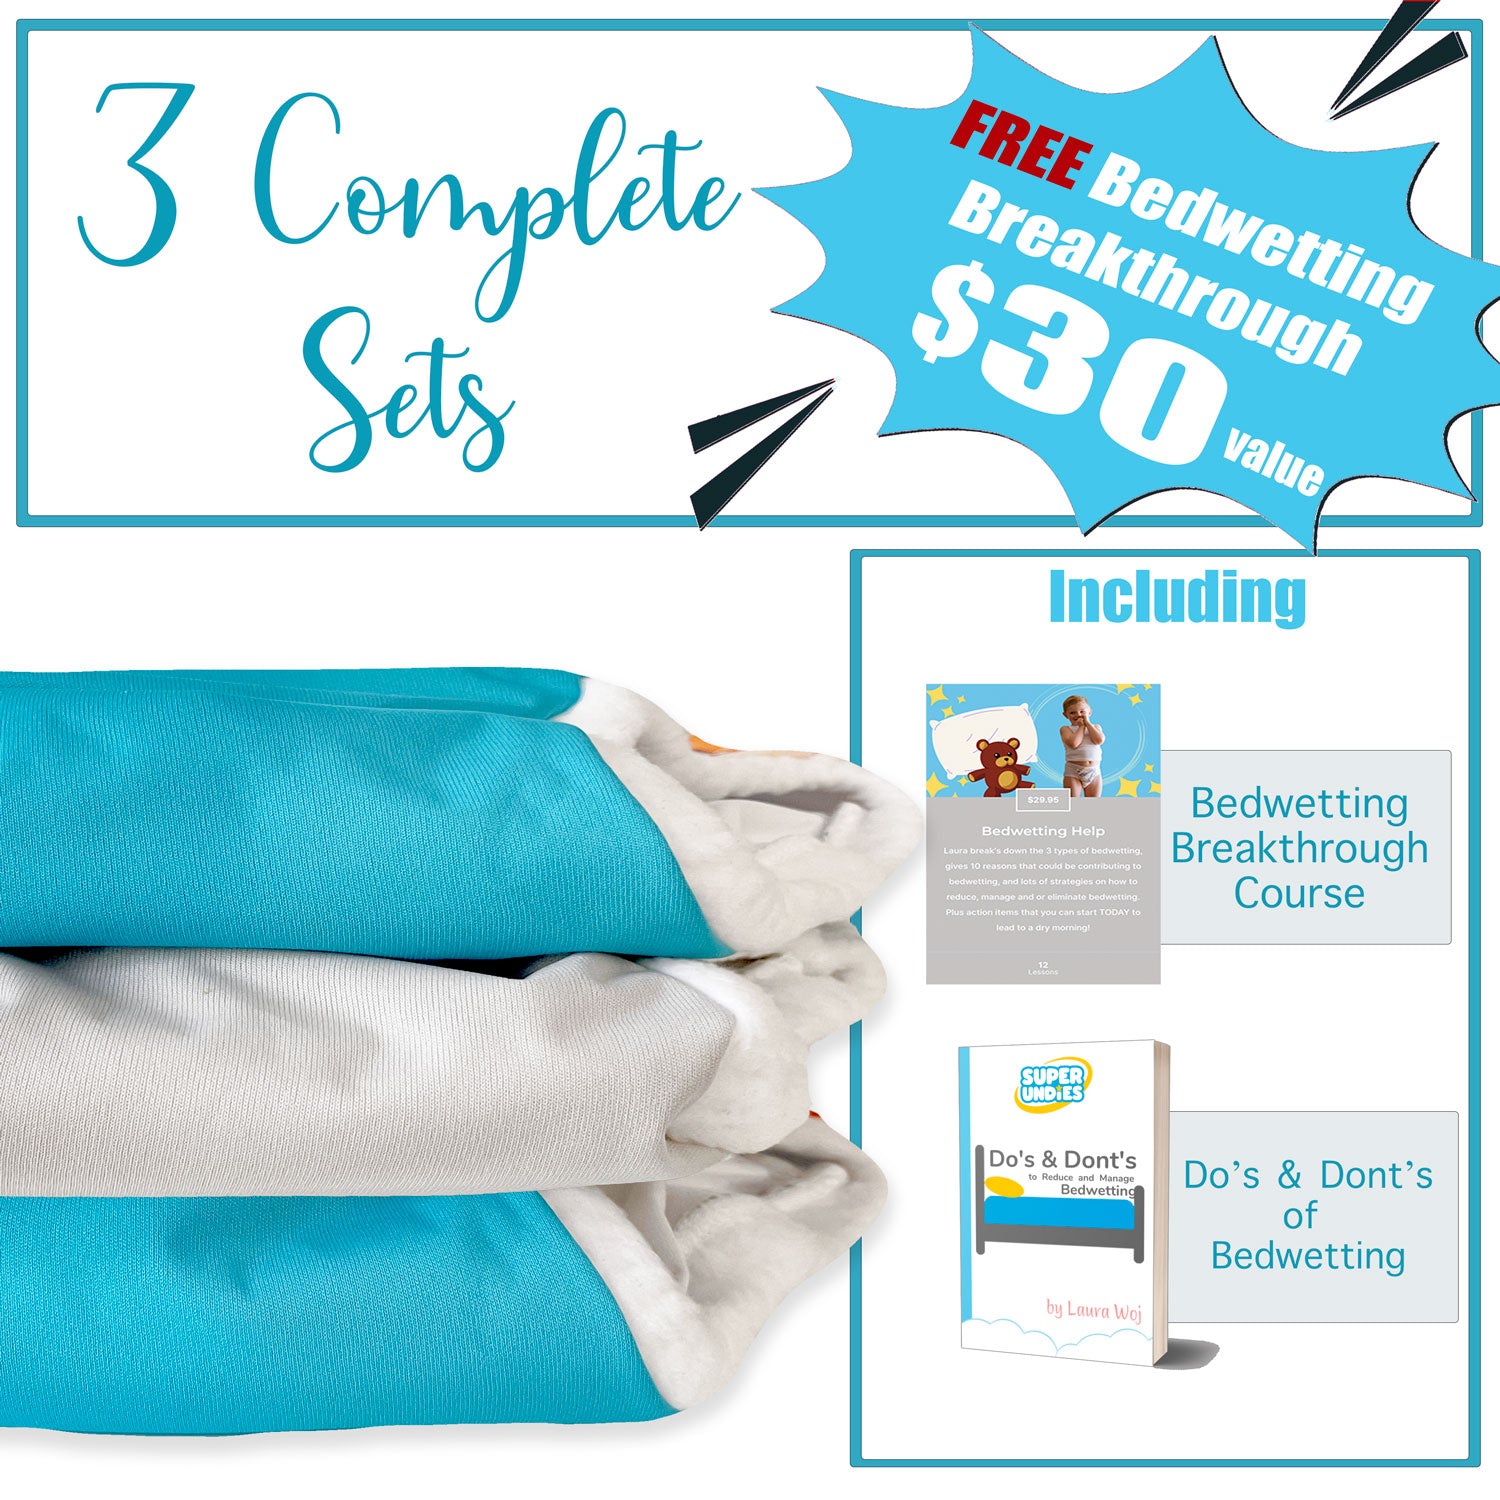 Best Potty Training Pants: Super Undies Pull-on Undies 2.0 Review +  Giveaway